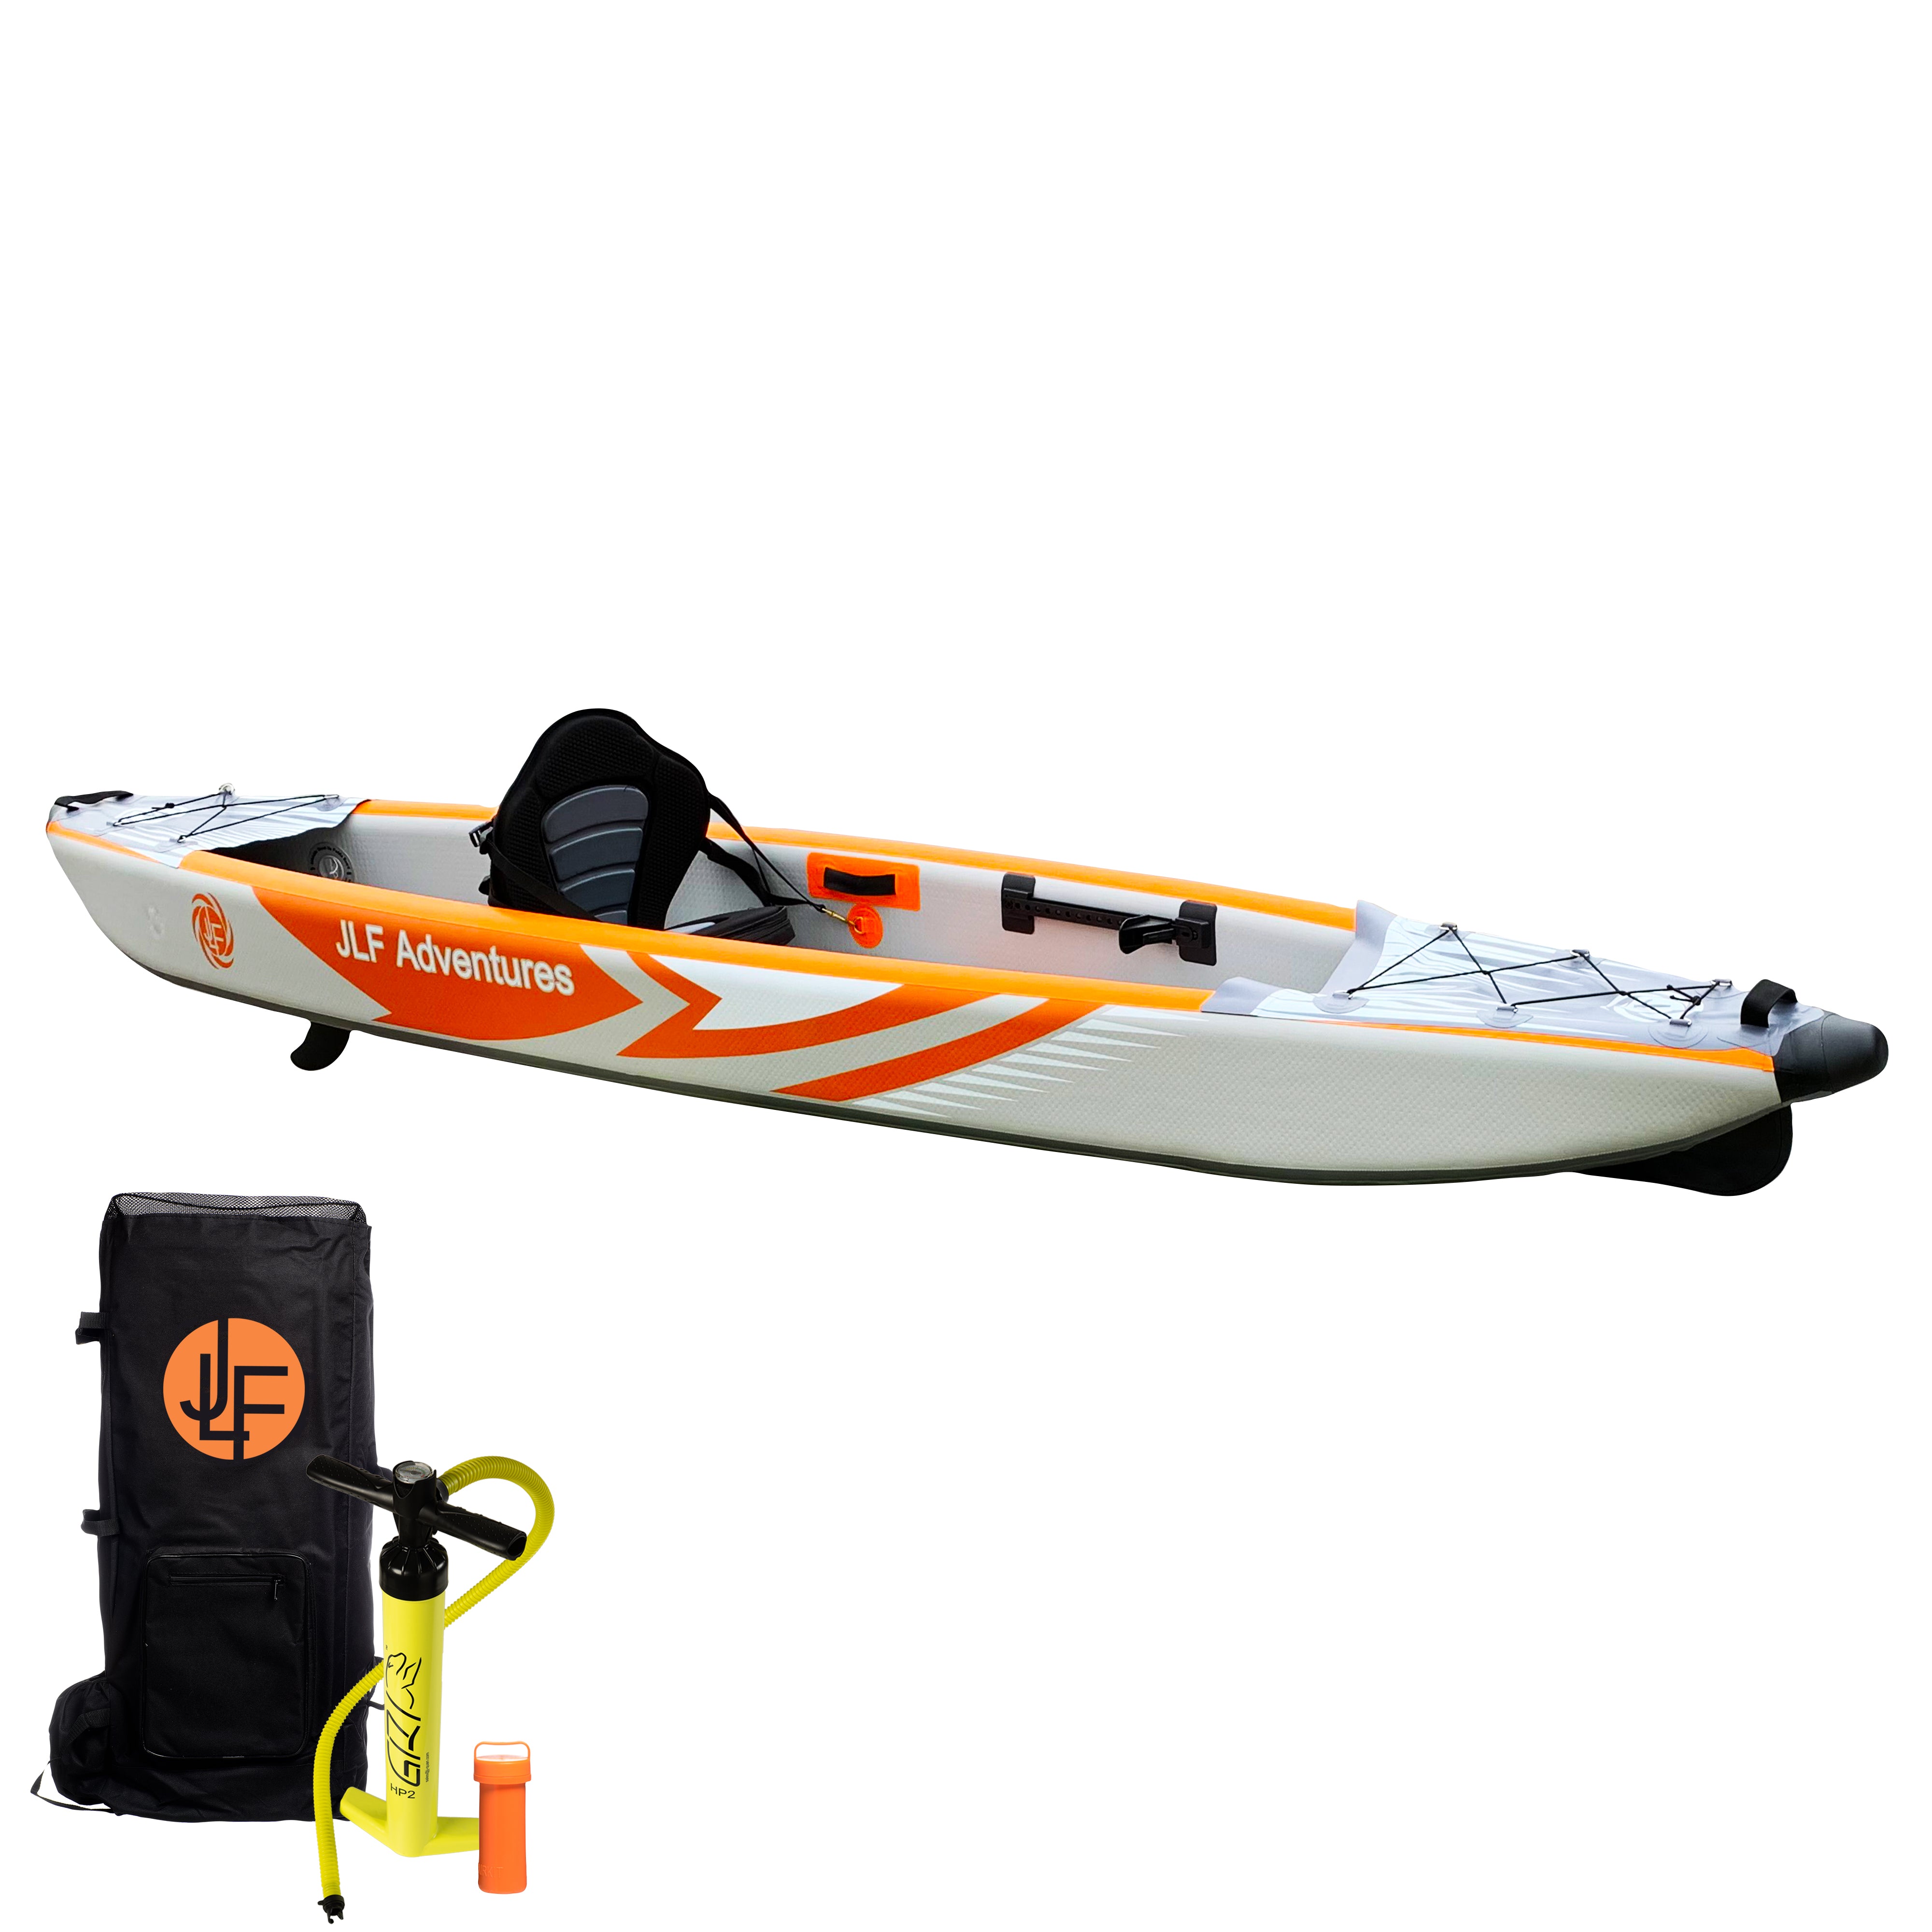 JLF Adventures JLF Detachable SUP Kayak Seat, Adjustable, Cushioned Back  Support, for Inflatable Stand Up Paddle Board Sit-On-Top Kayak and Canoe  on Marmalade